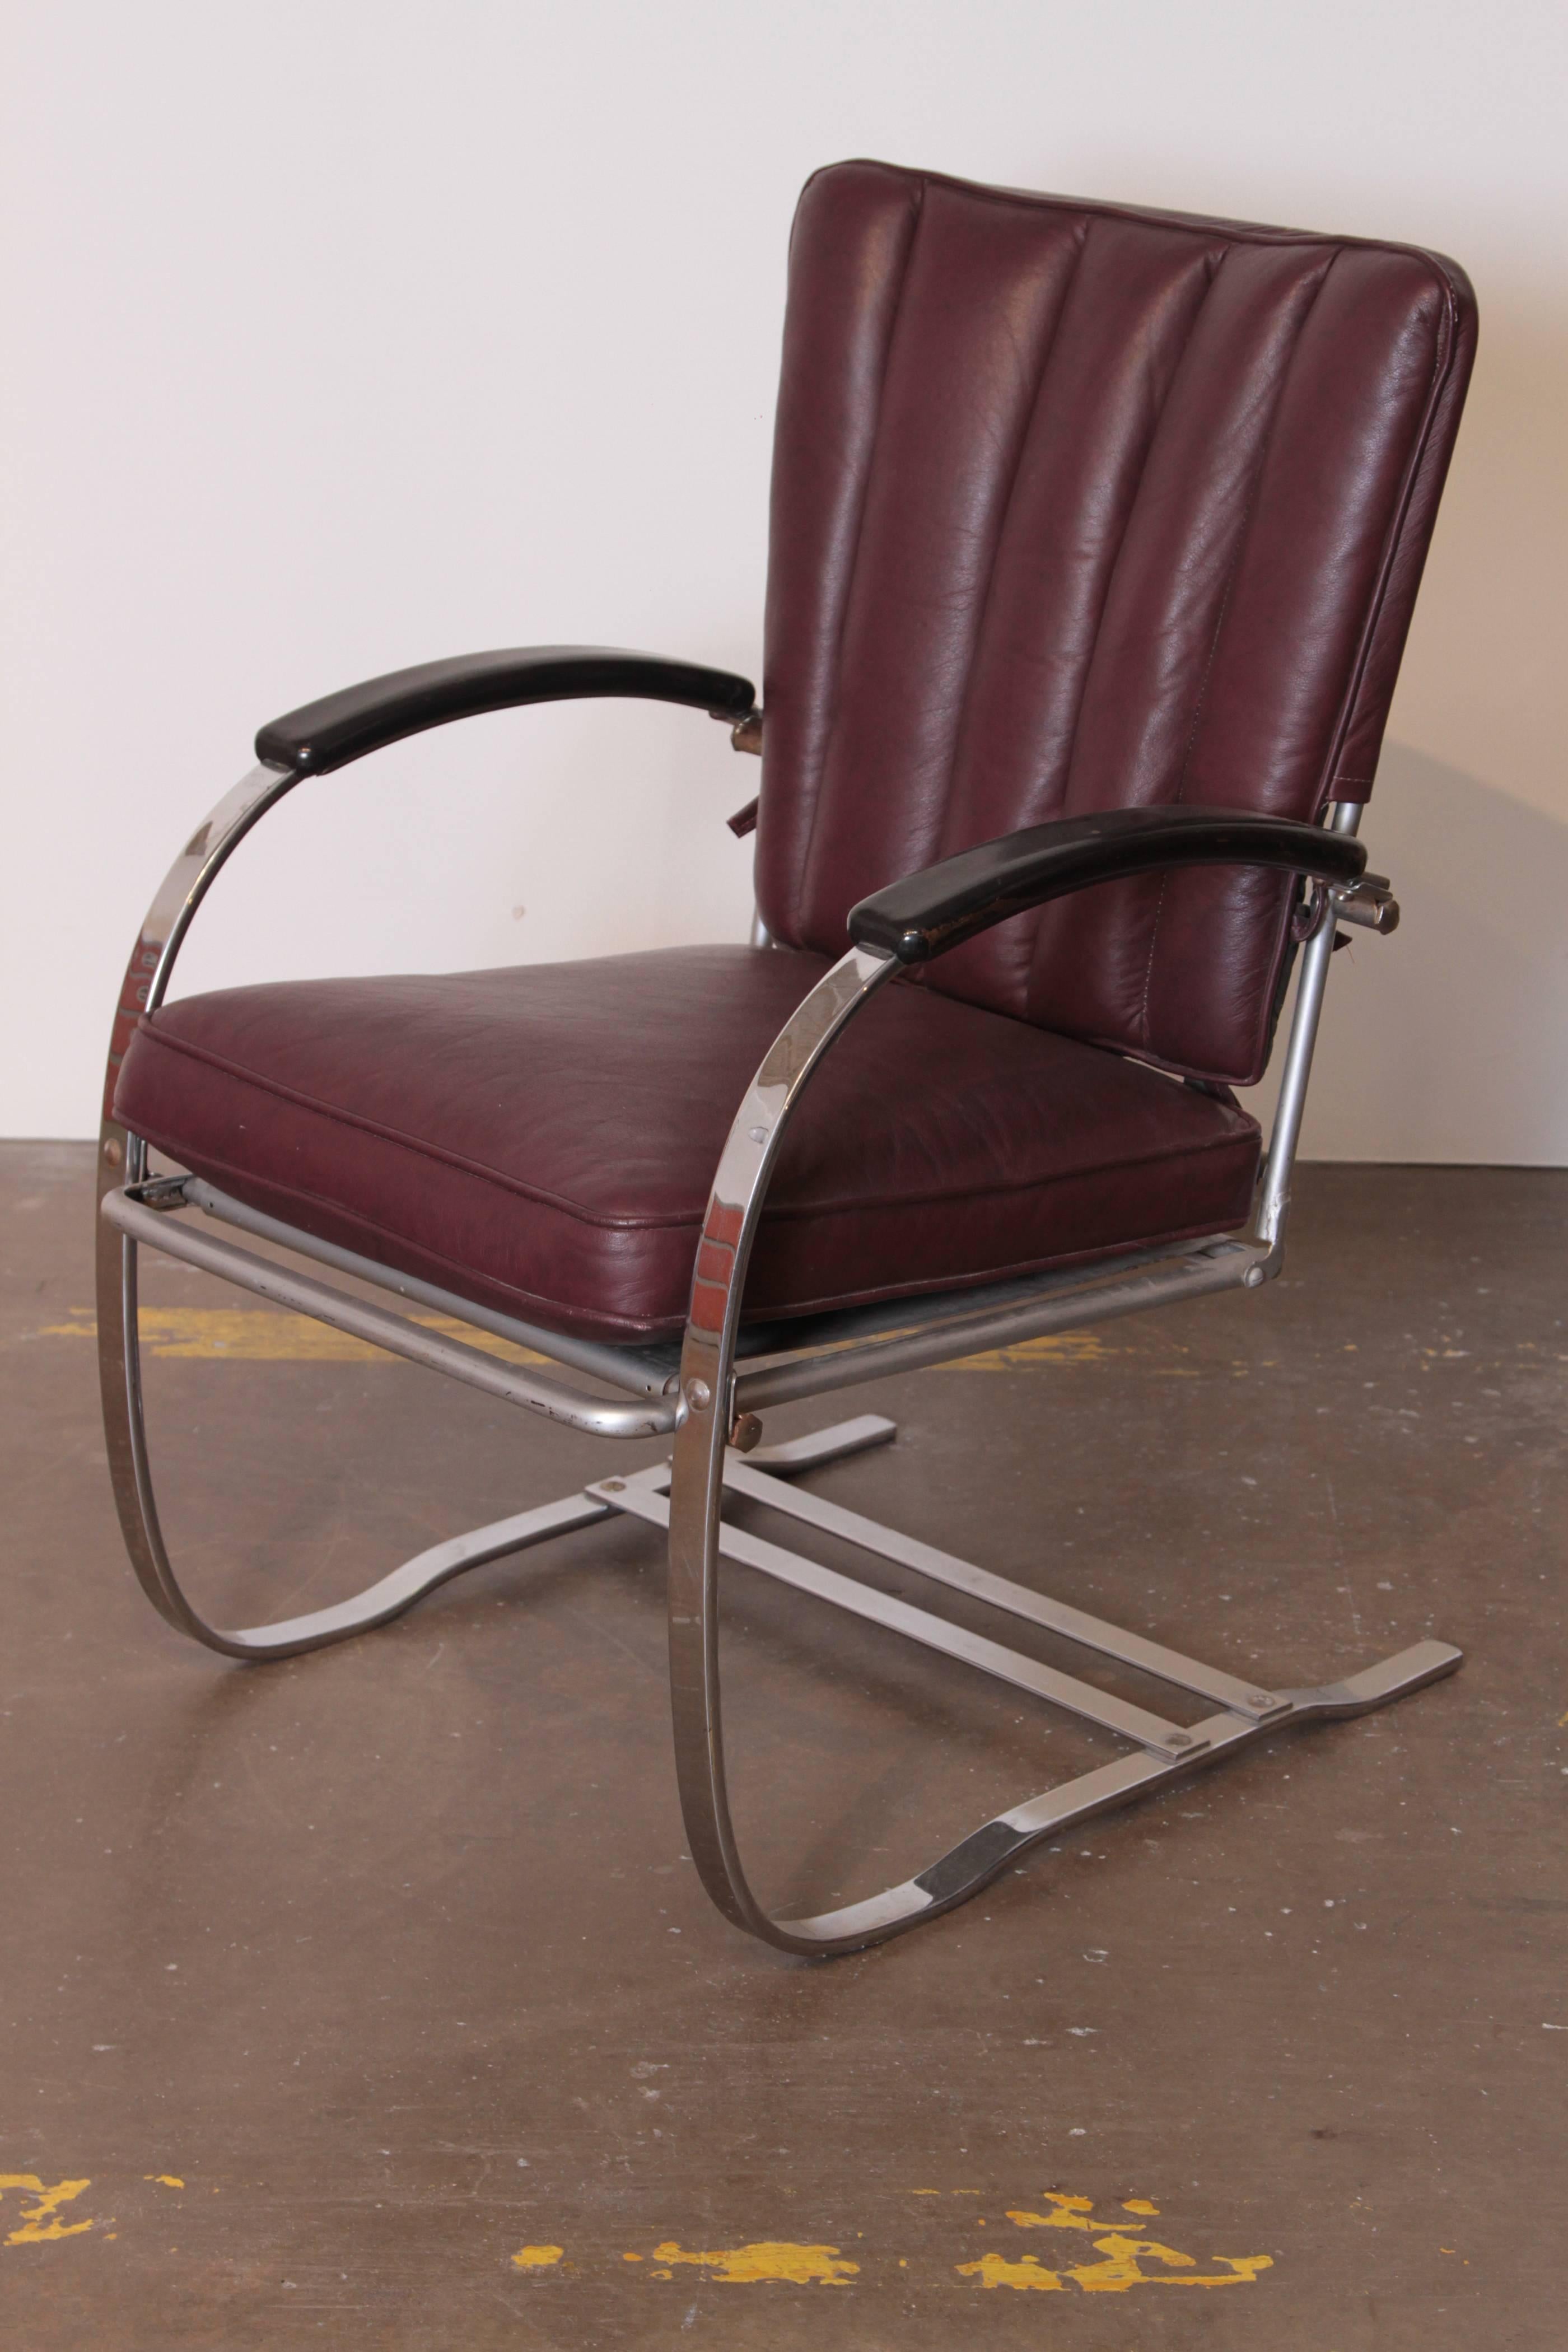 Art Deco Machine Age Wolfgang Hoffmann for Howell Cantilevered Springer Chair   Cantilever  Streamline Industrial Design
PRICE REDUCED

Classic Hoffmann - designed cantilevered spring chair. Hoffman.  Hofman.
Howell Modern Chrome Steel Furniture